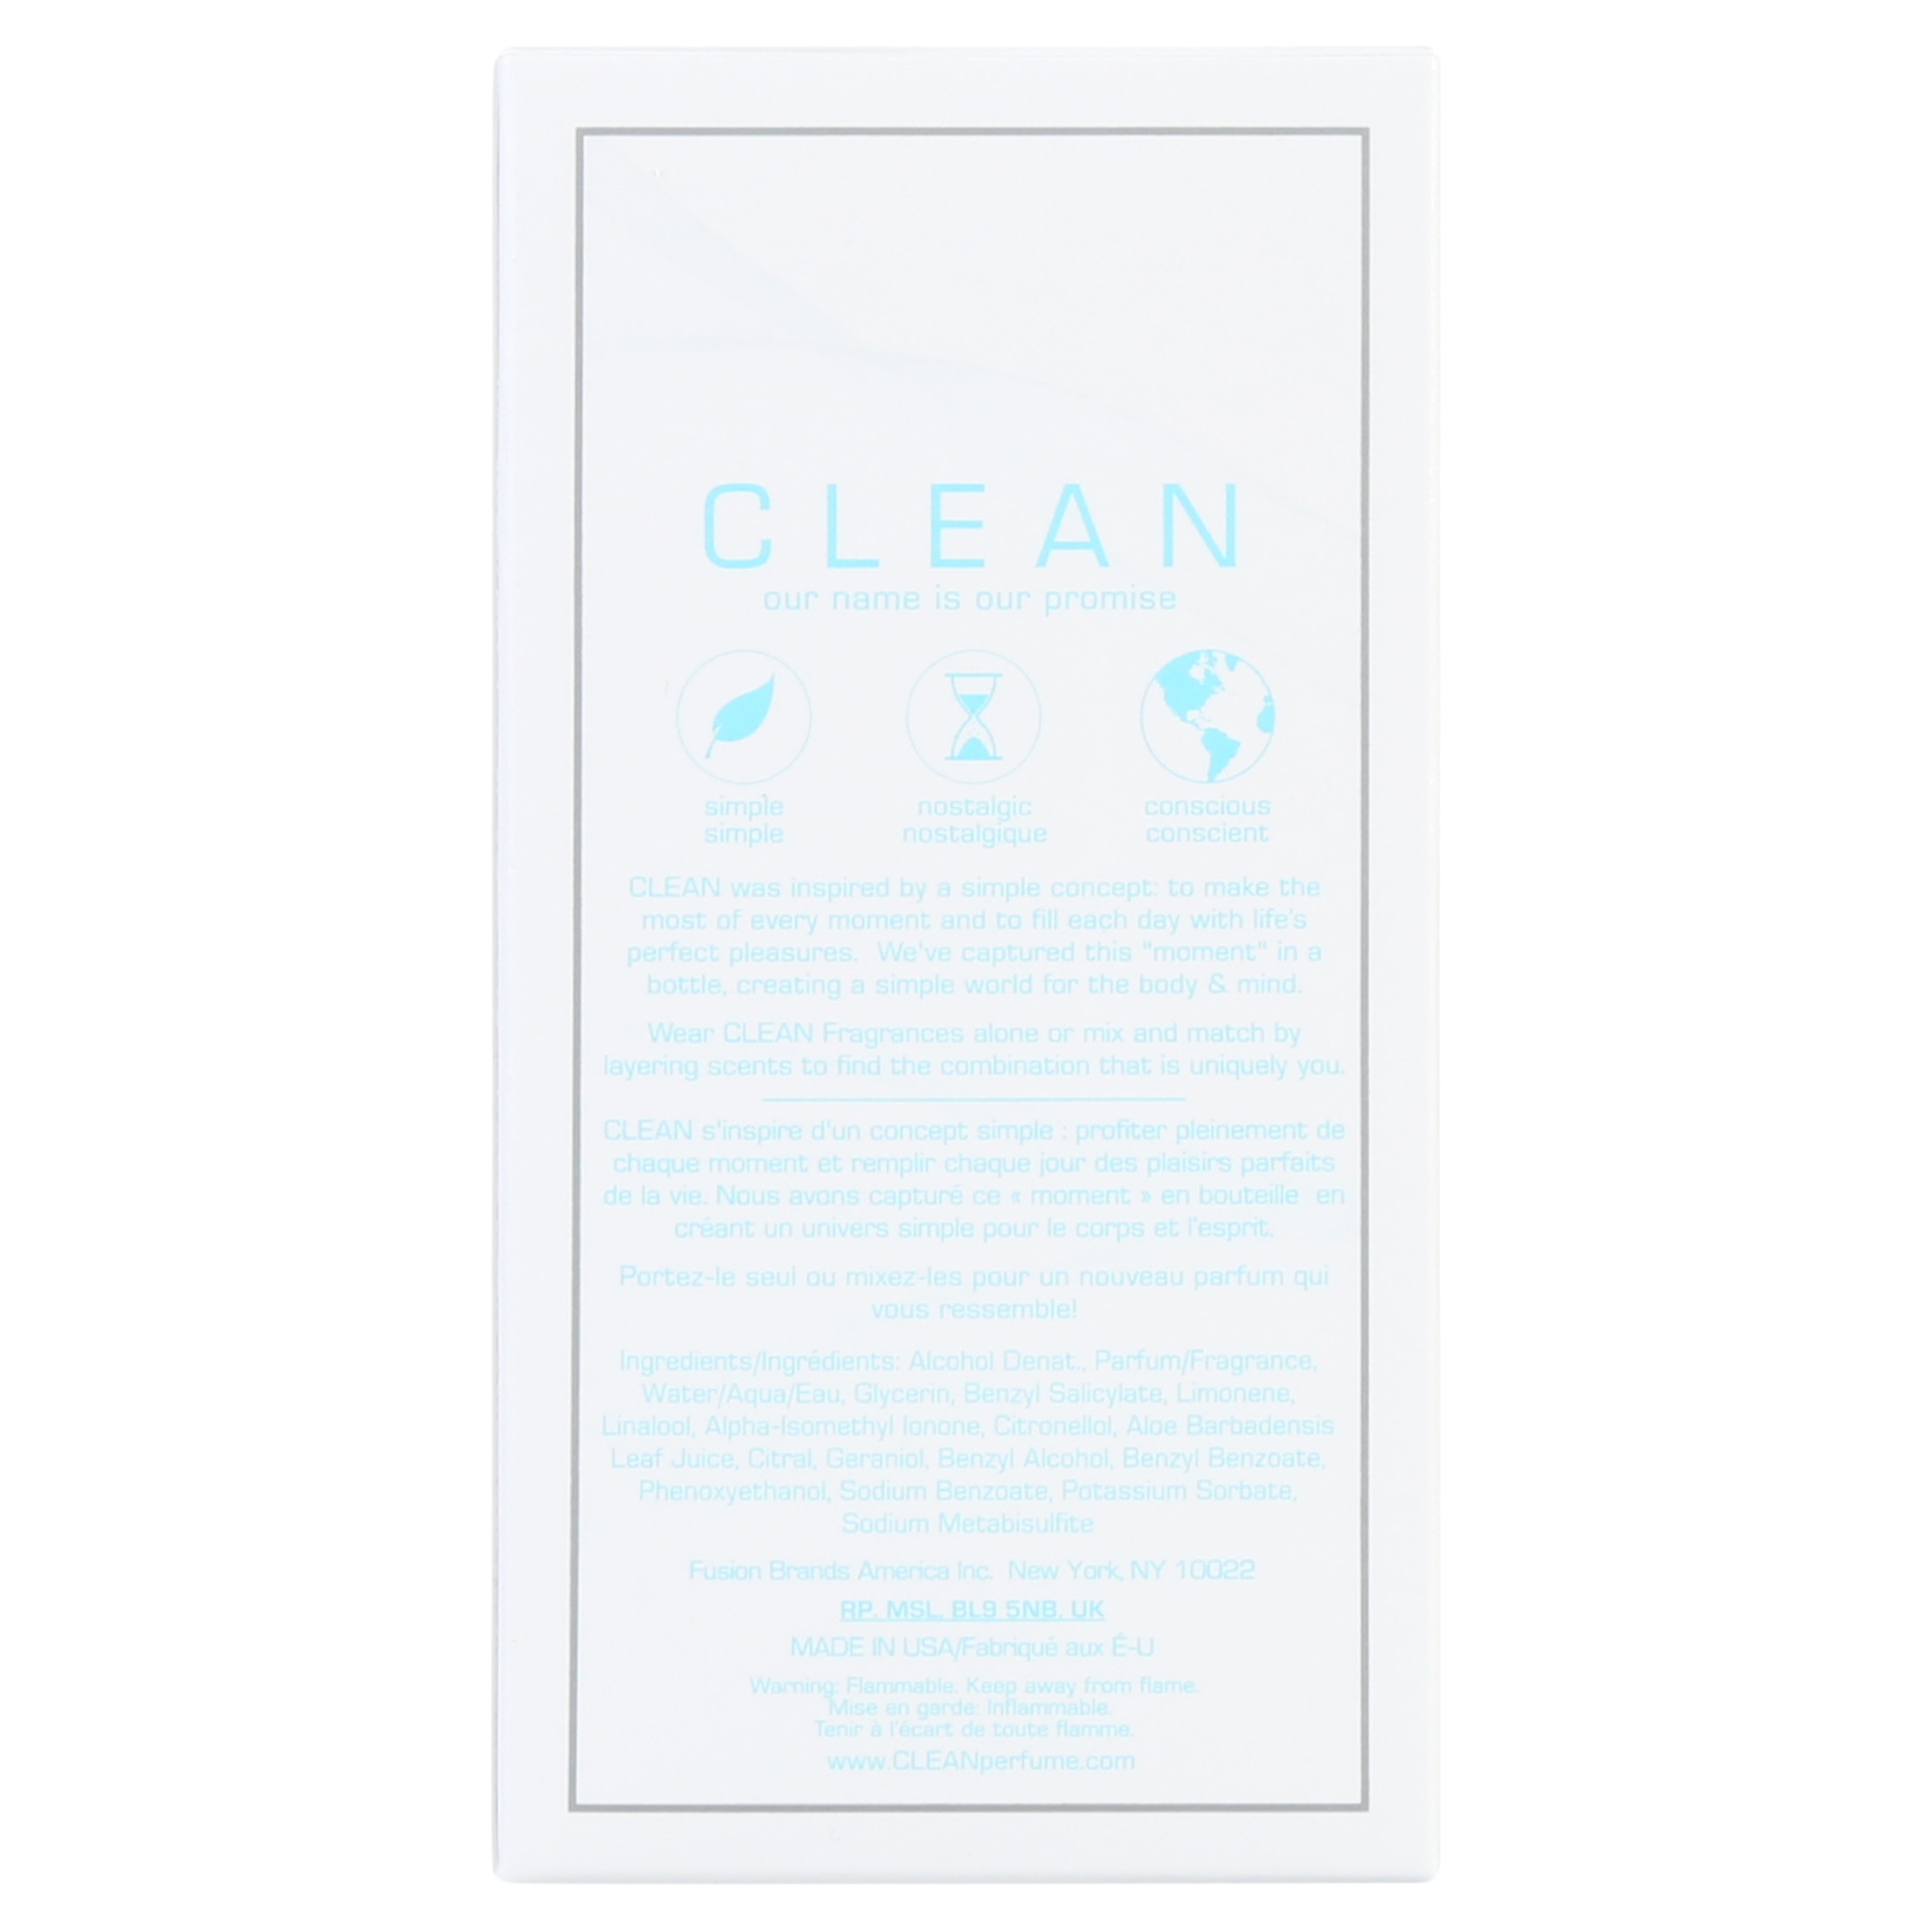 Air by Clean for Women - 2.14 oz EDP Spray - image 4 of 6